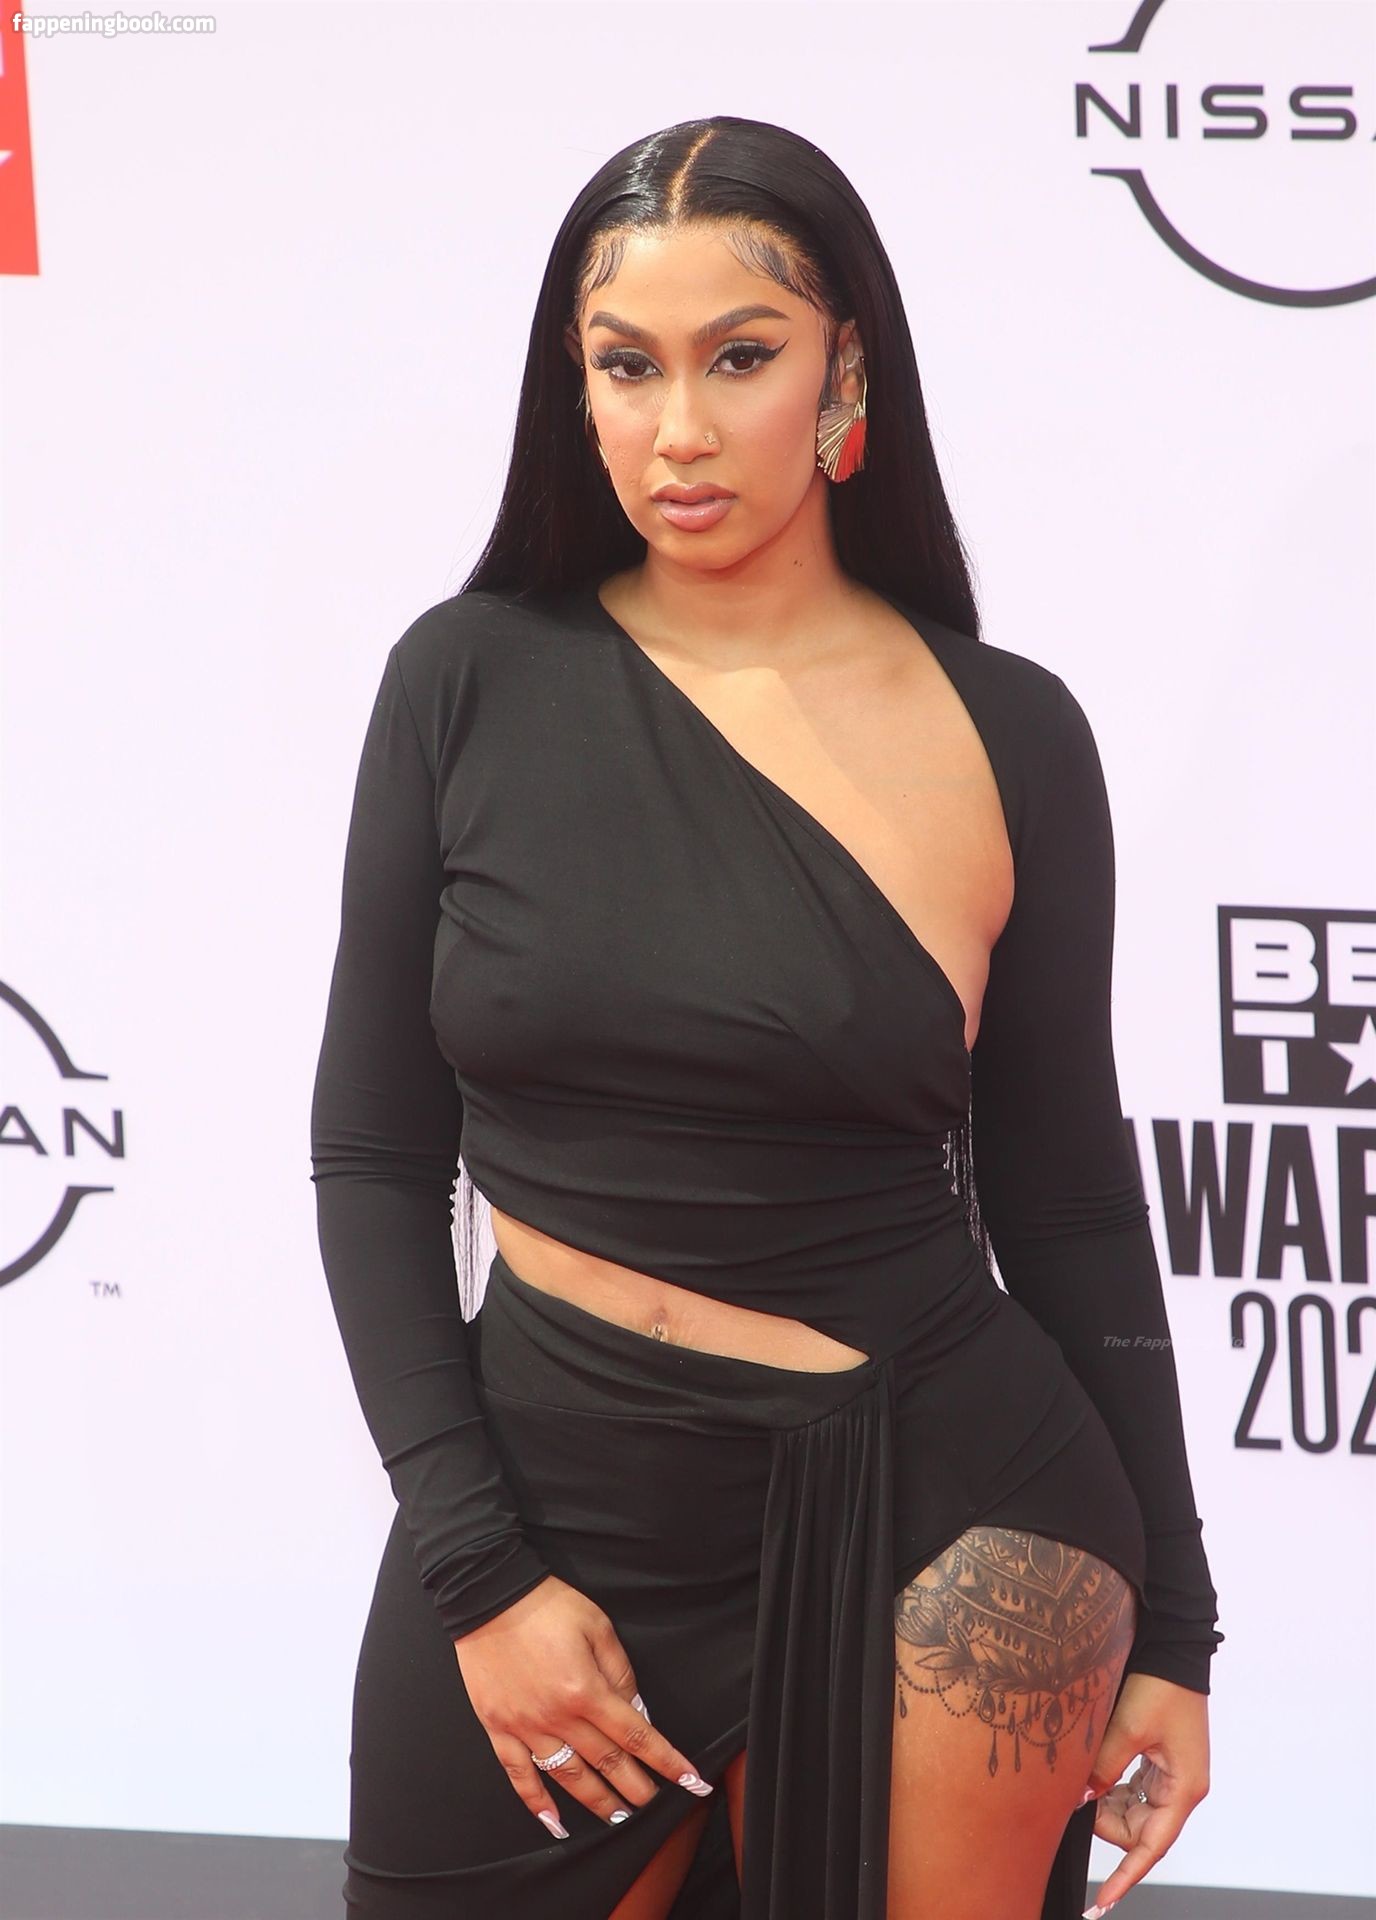 Queen Naija Nude, The Fappening - Photo #1334916 - FappeningBook.